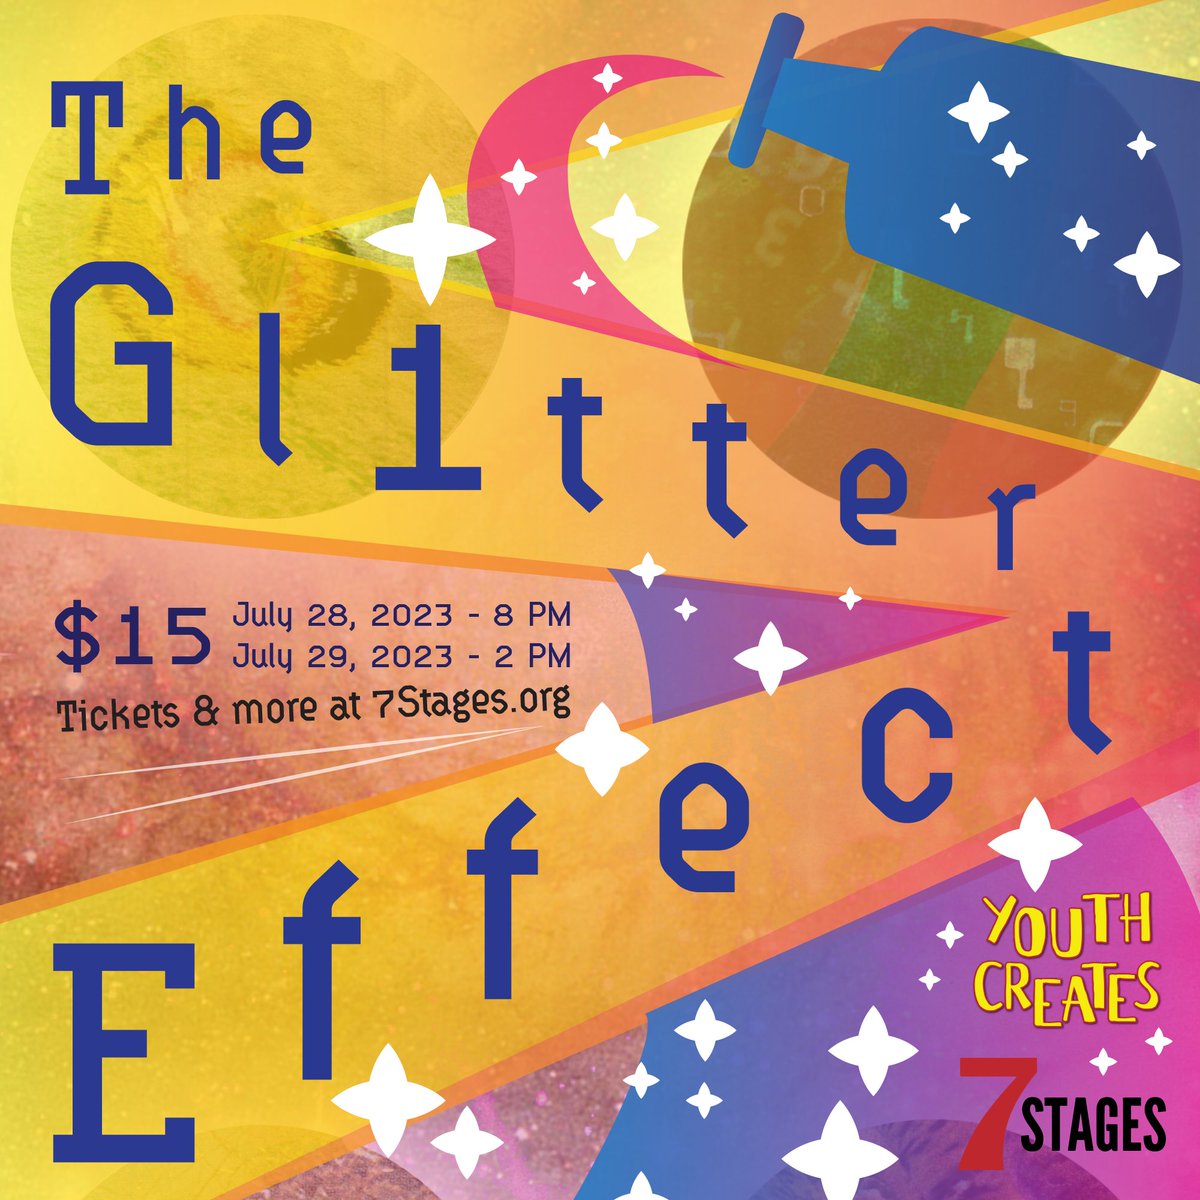 Its official! Youth Creates 2023 Ensemble's production is 'The Glitter Effect', and tickets are live on our website! We will have two performances this year on July 28 at 8 PM and July 29 at 2 PM. Come out and support the ensemble at their premiere!!!